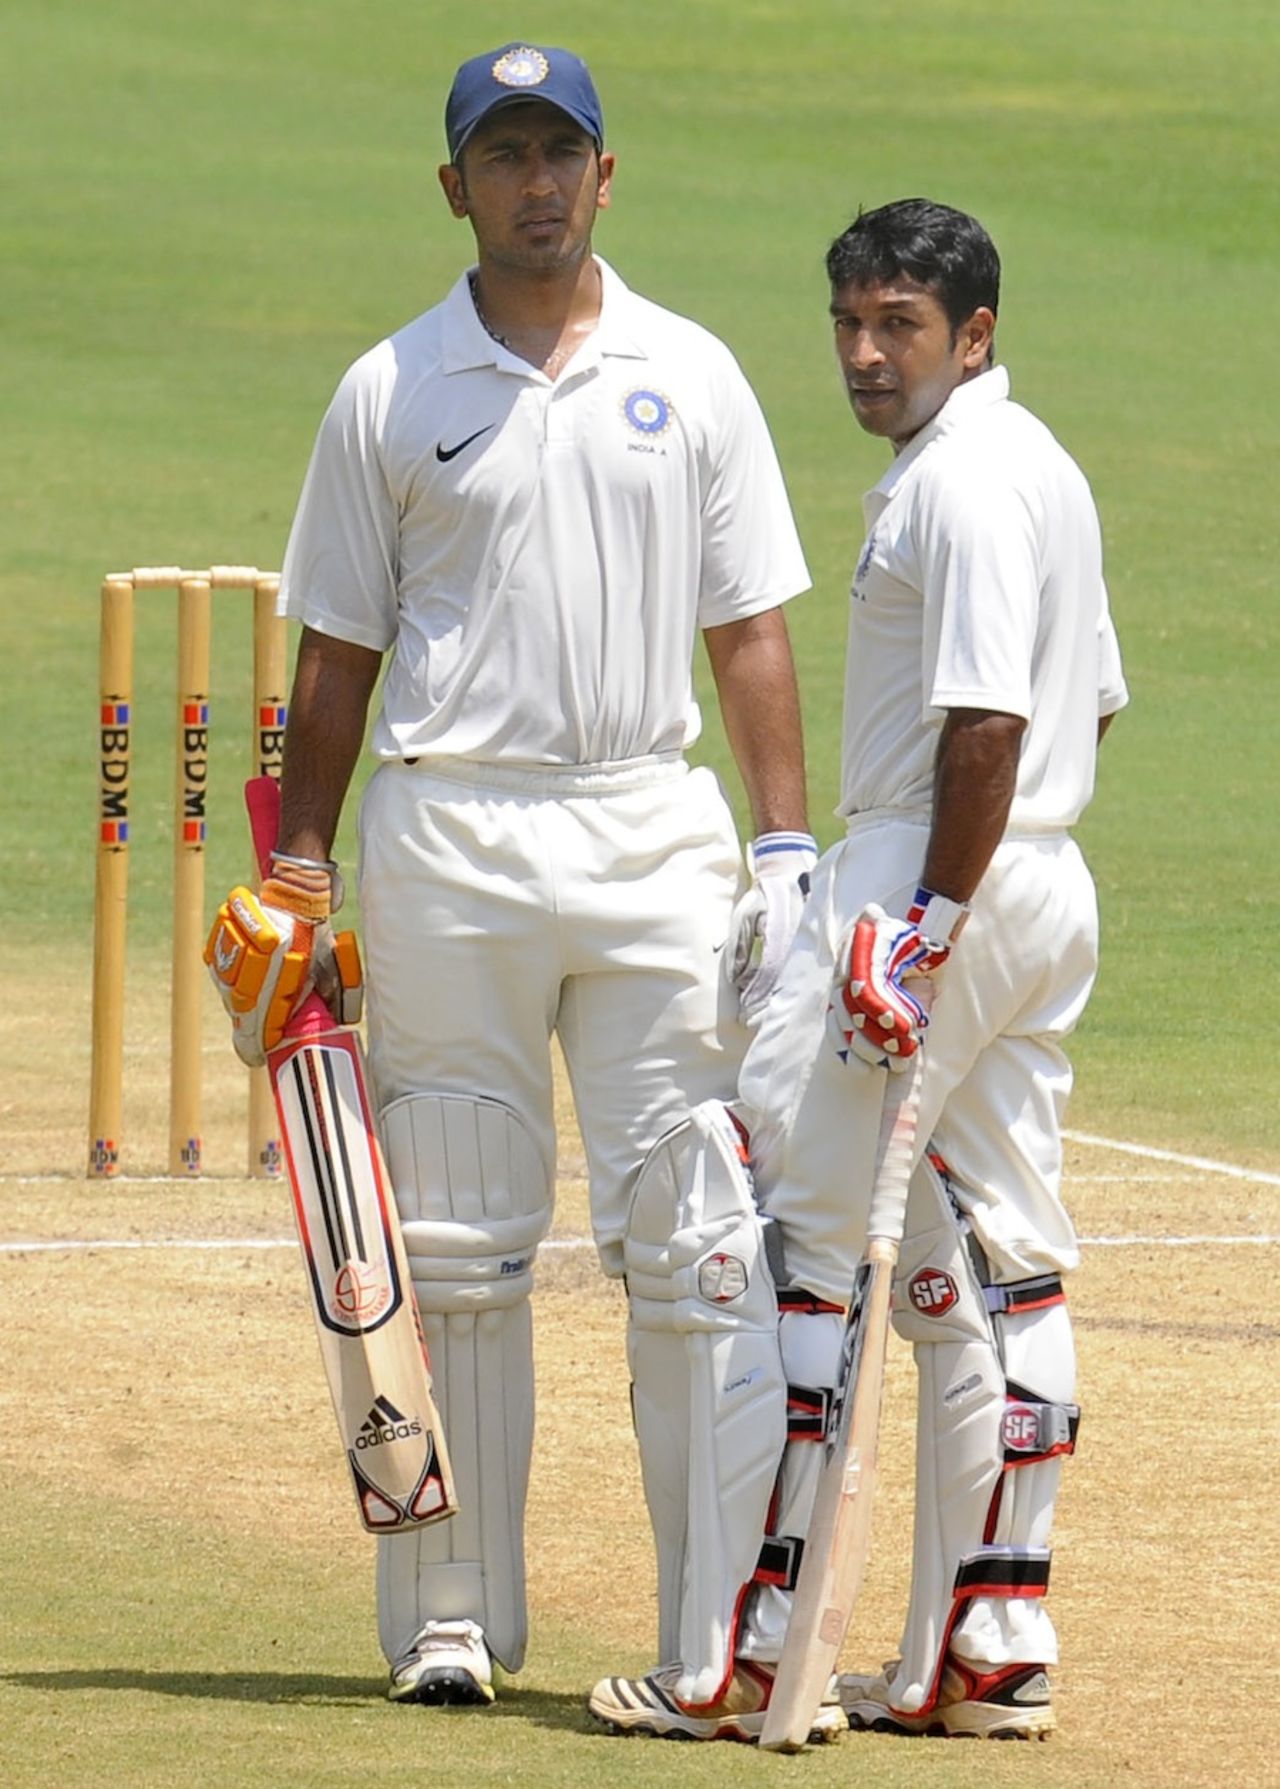 Manprit Juneja and VA Jagadeesh put on 197 for the third wicket, India A v New Zealand A, 2nd unofficial Test, 3rd day, Visakhapatnam, September 4, 2013